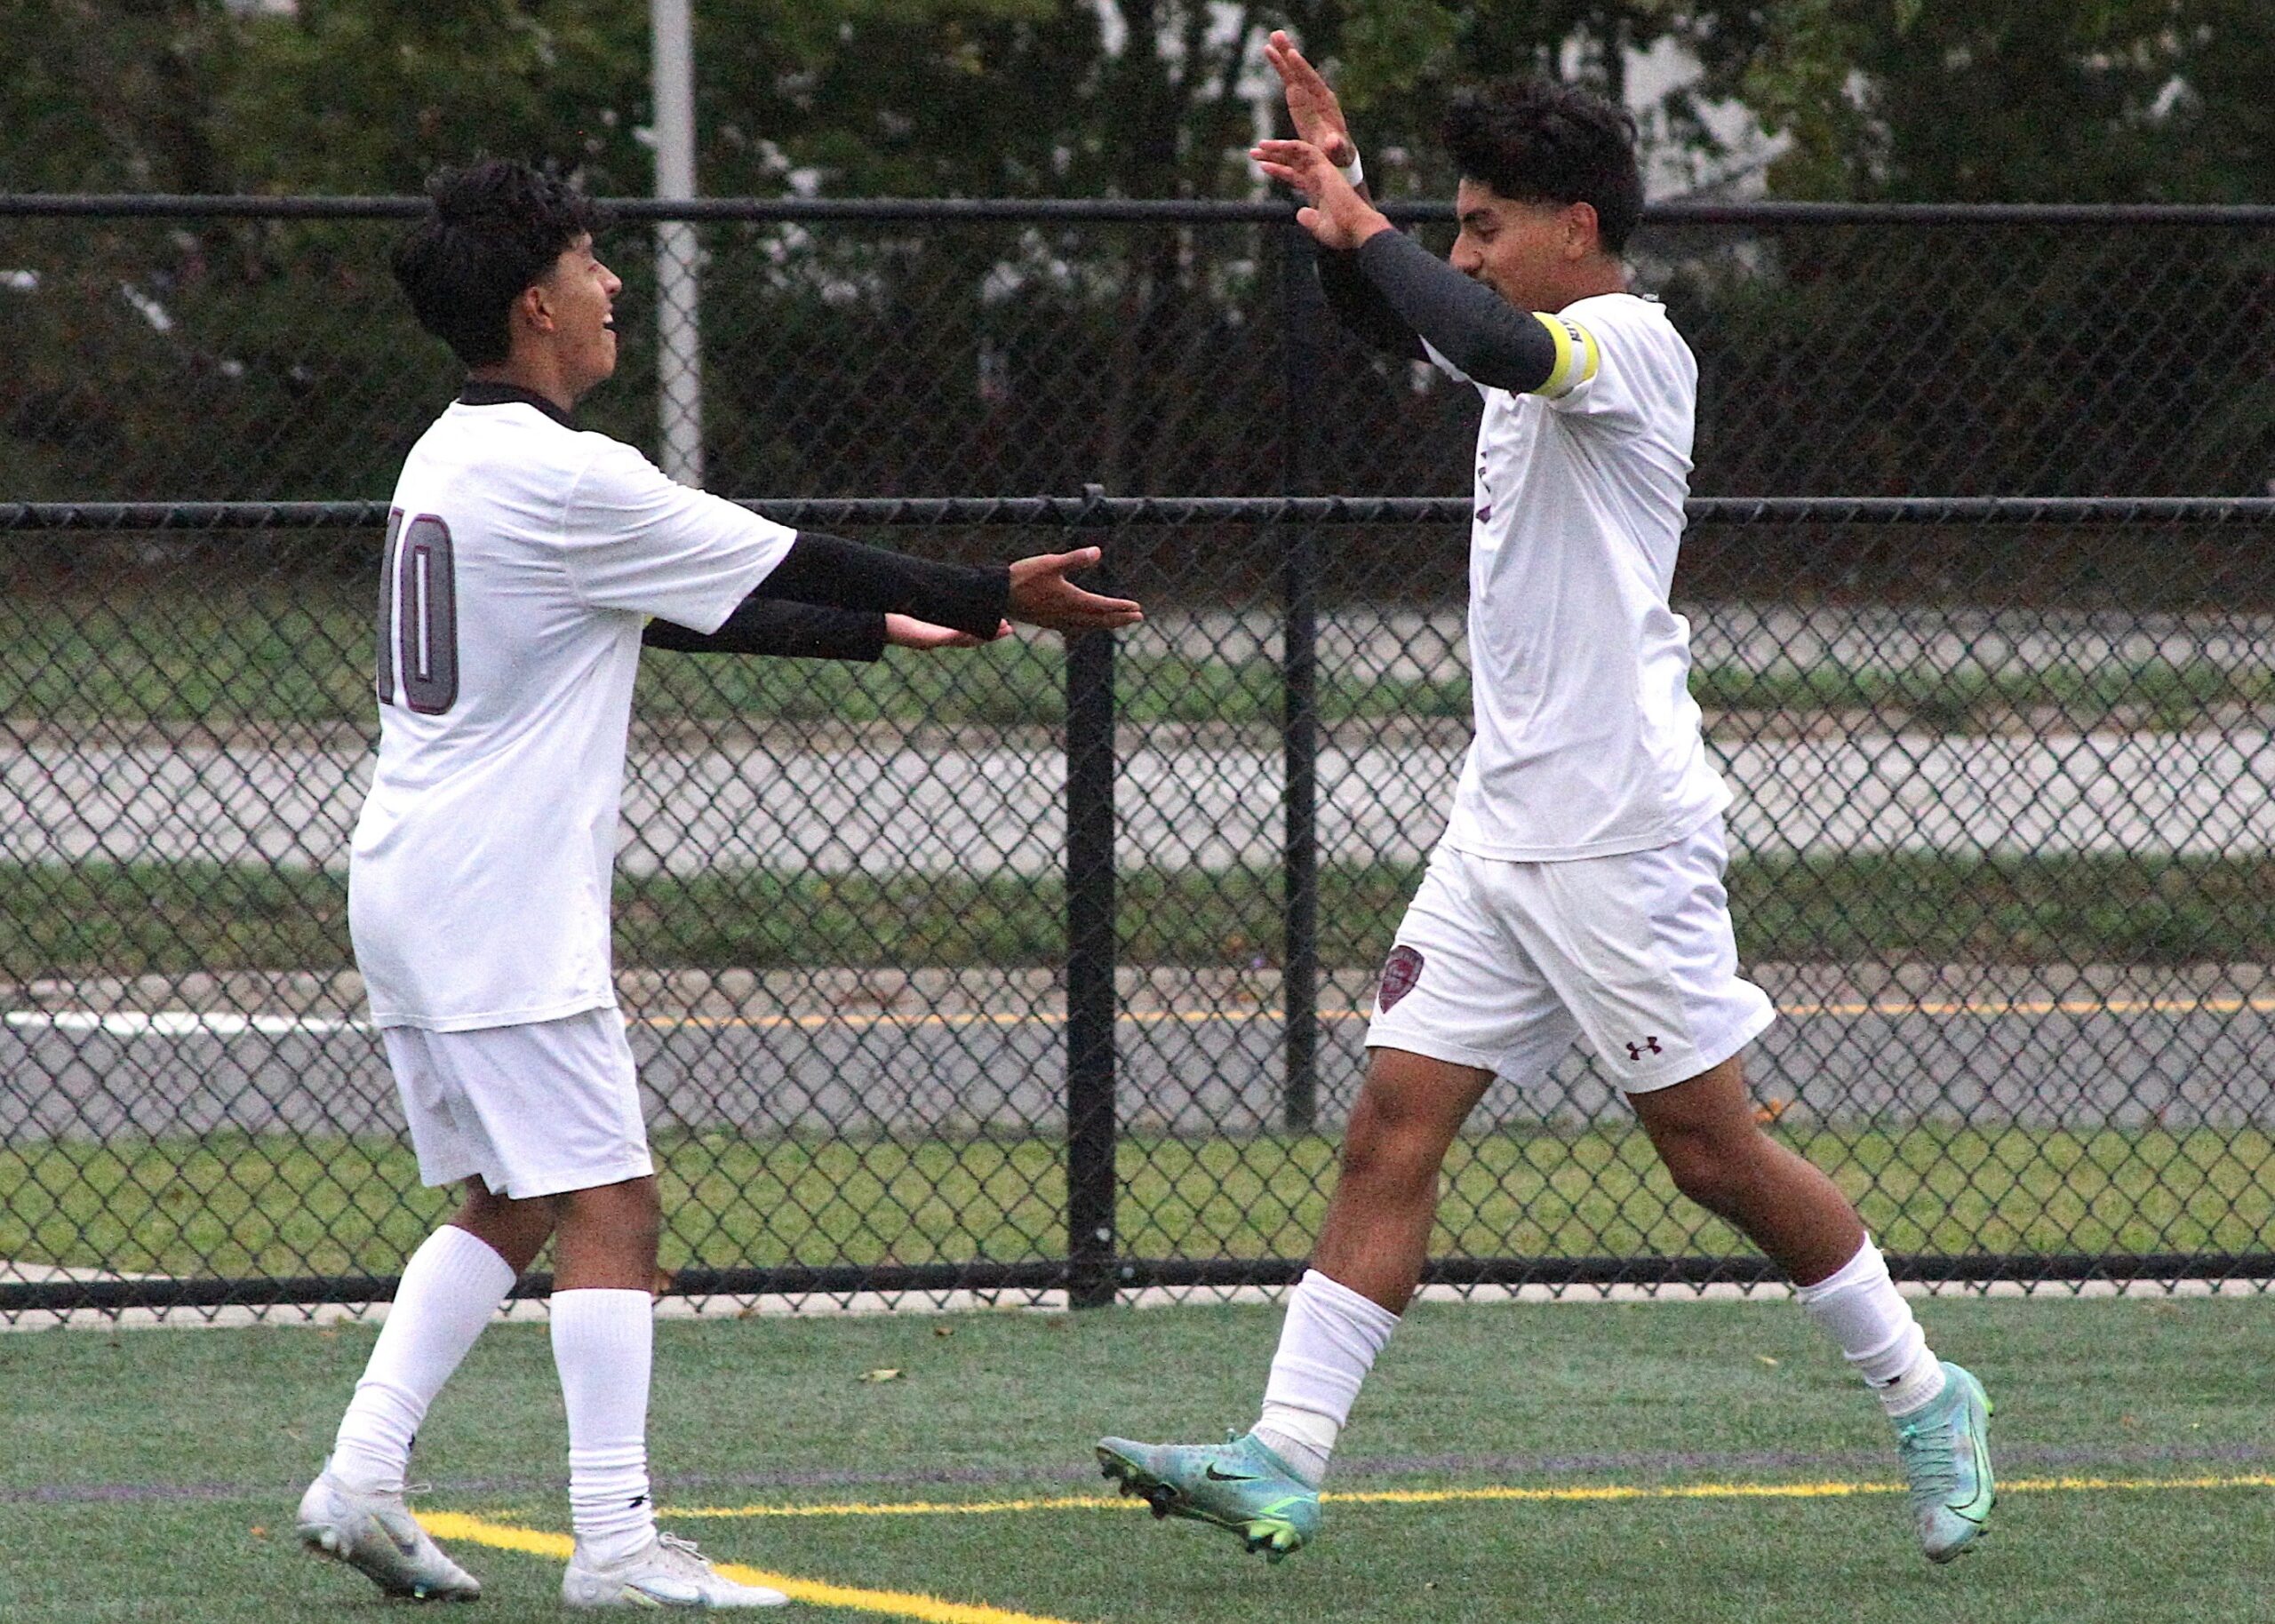 Senior forwards Eric Amijos and Michael Figueroa celebrate connecting for the final goal of the game. DESIRÉE KEEGAN